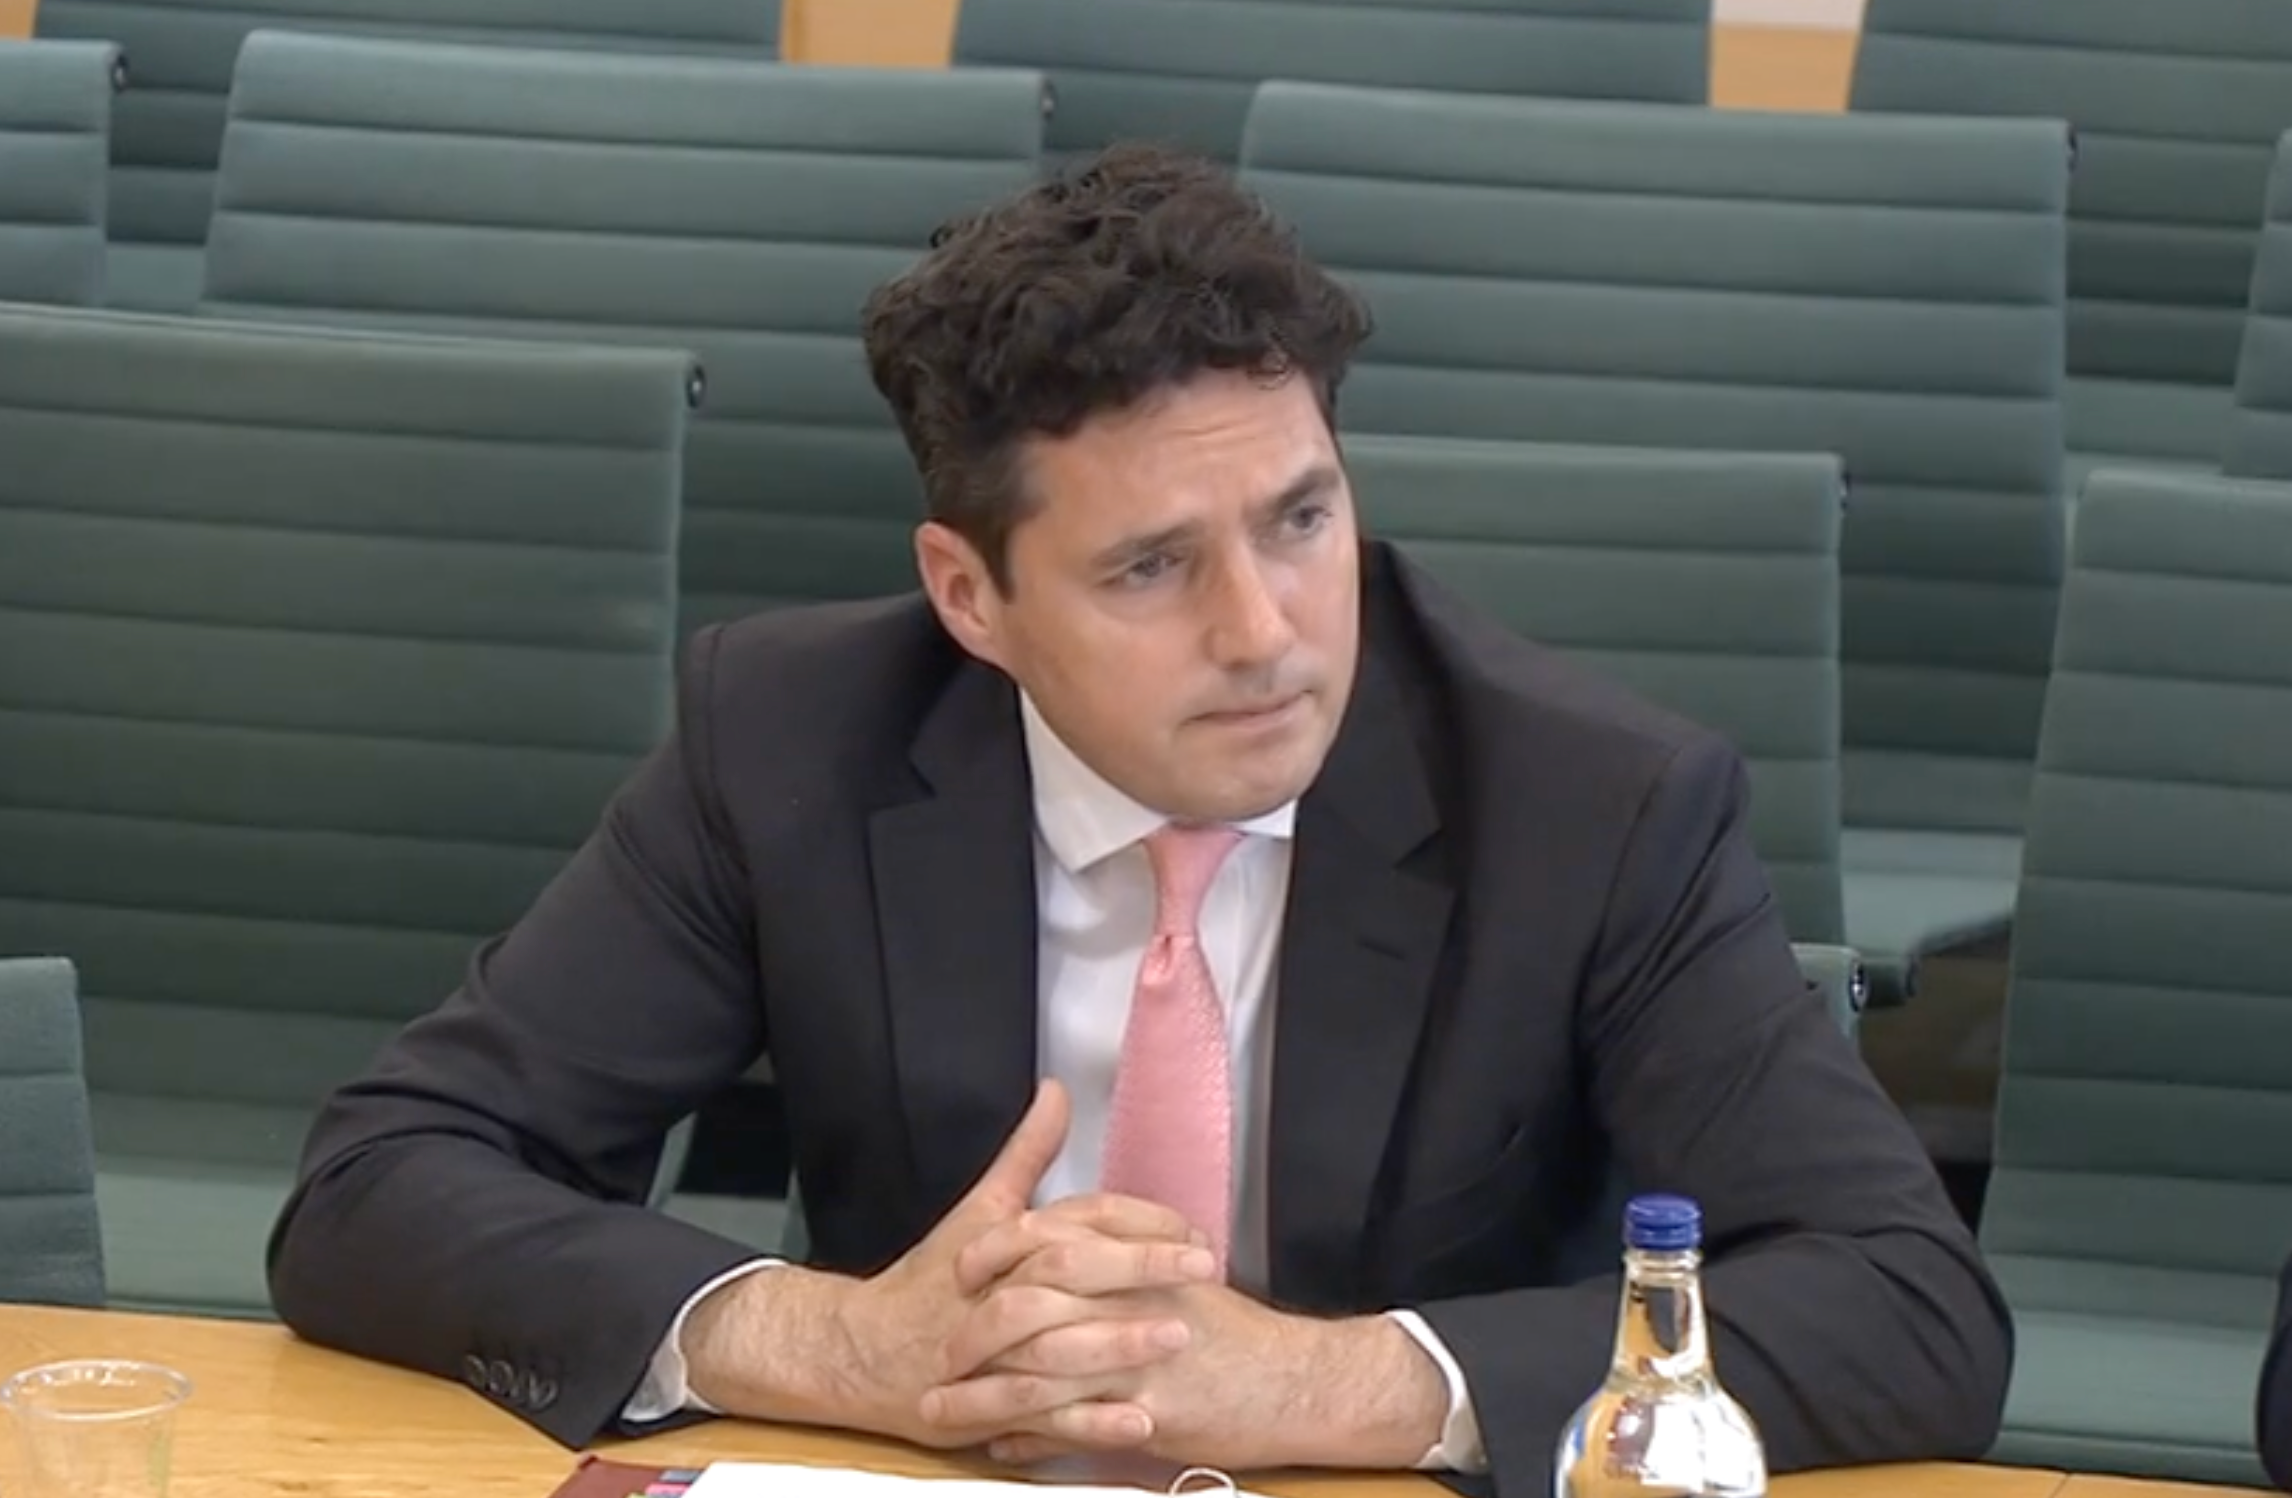 Huw Merriman, the rail minister, appearing at the transport select committee